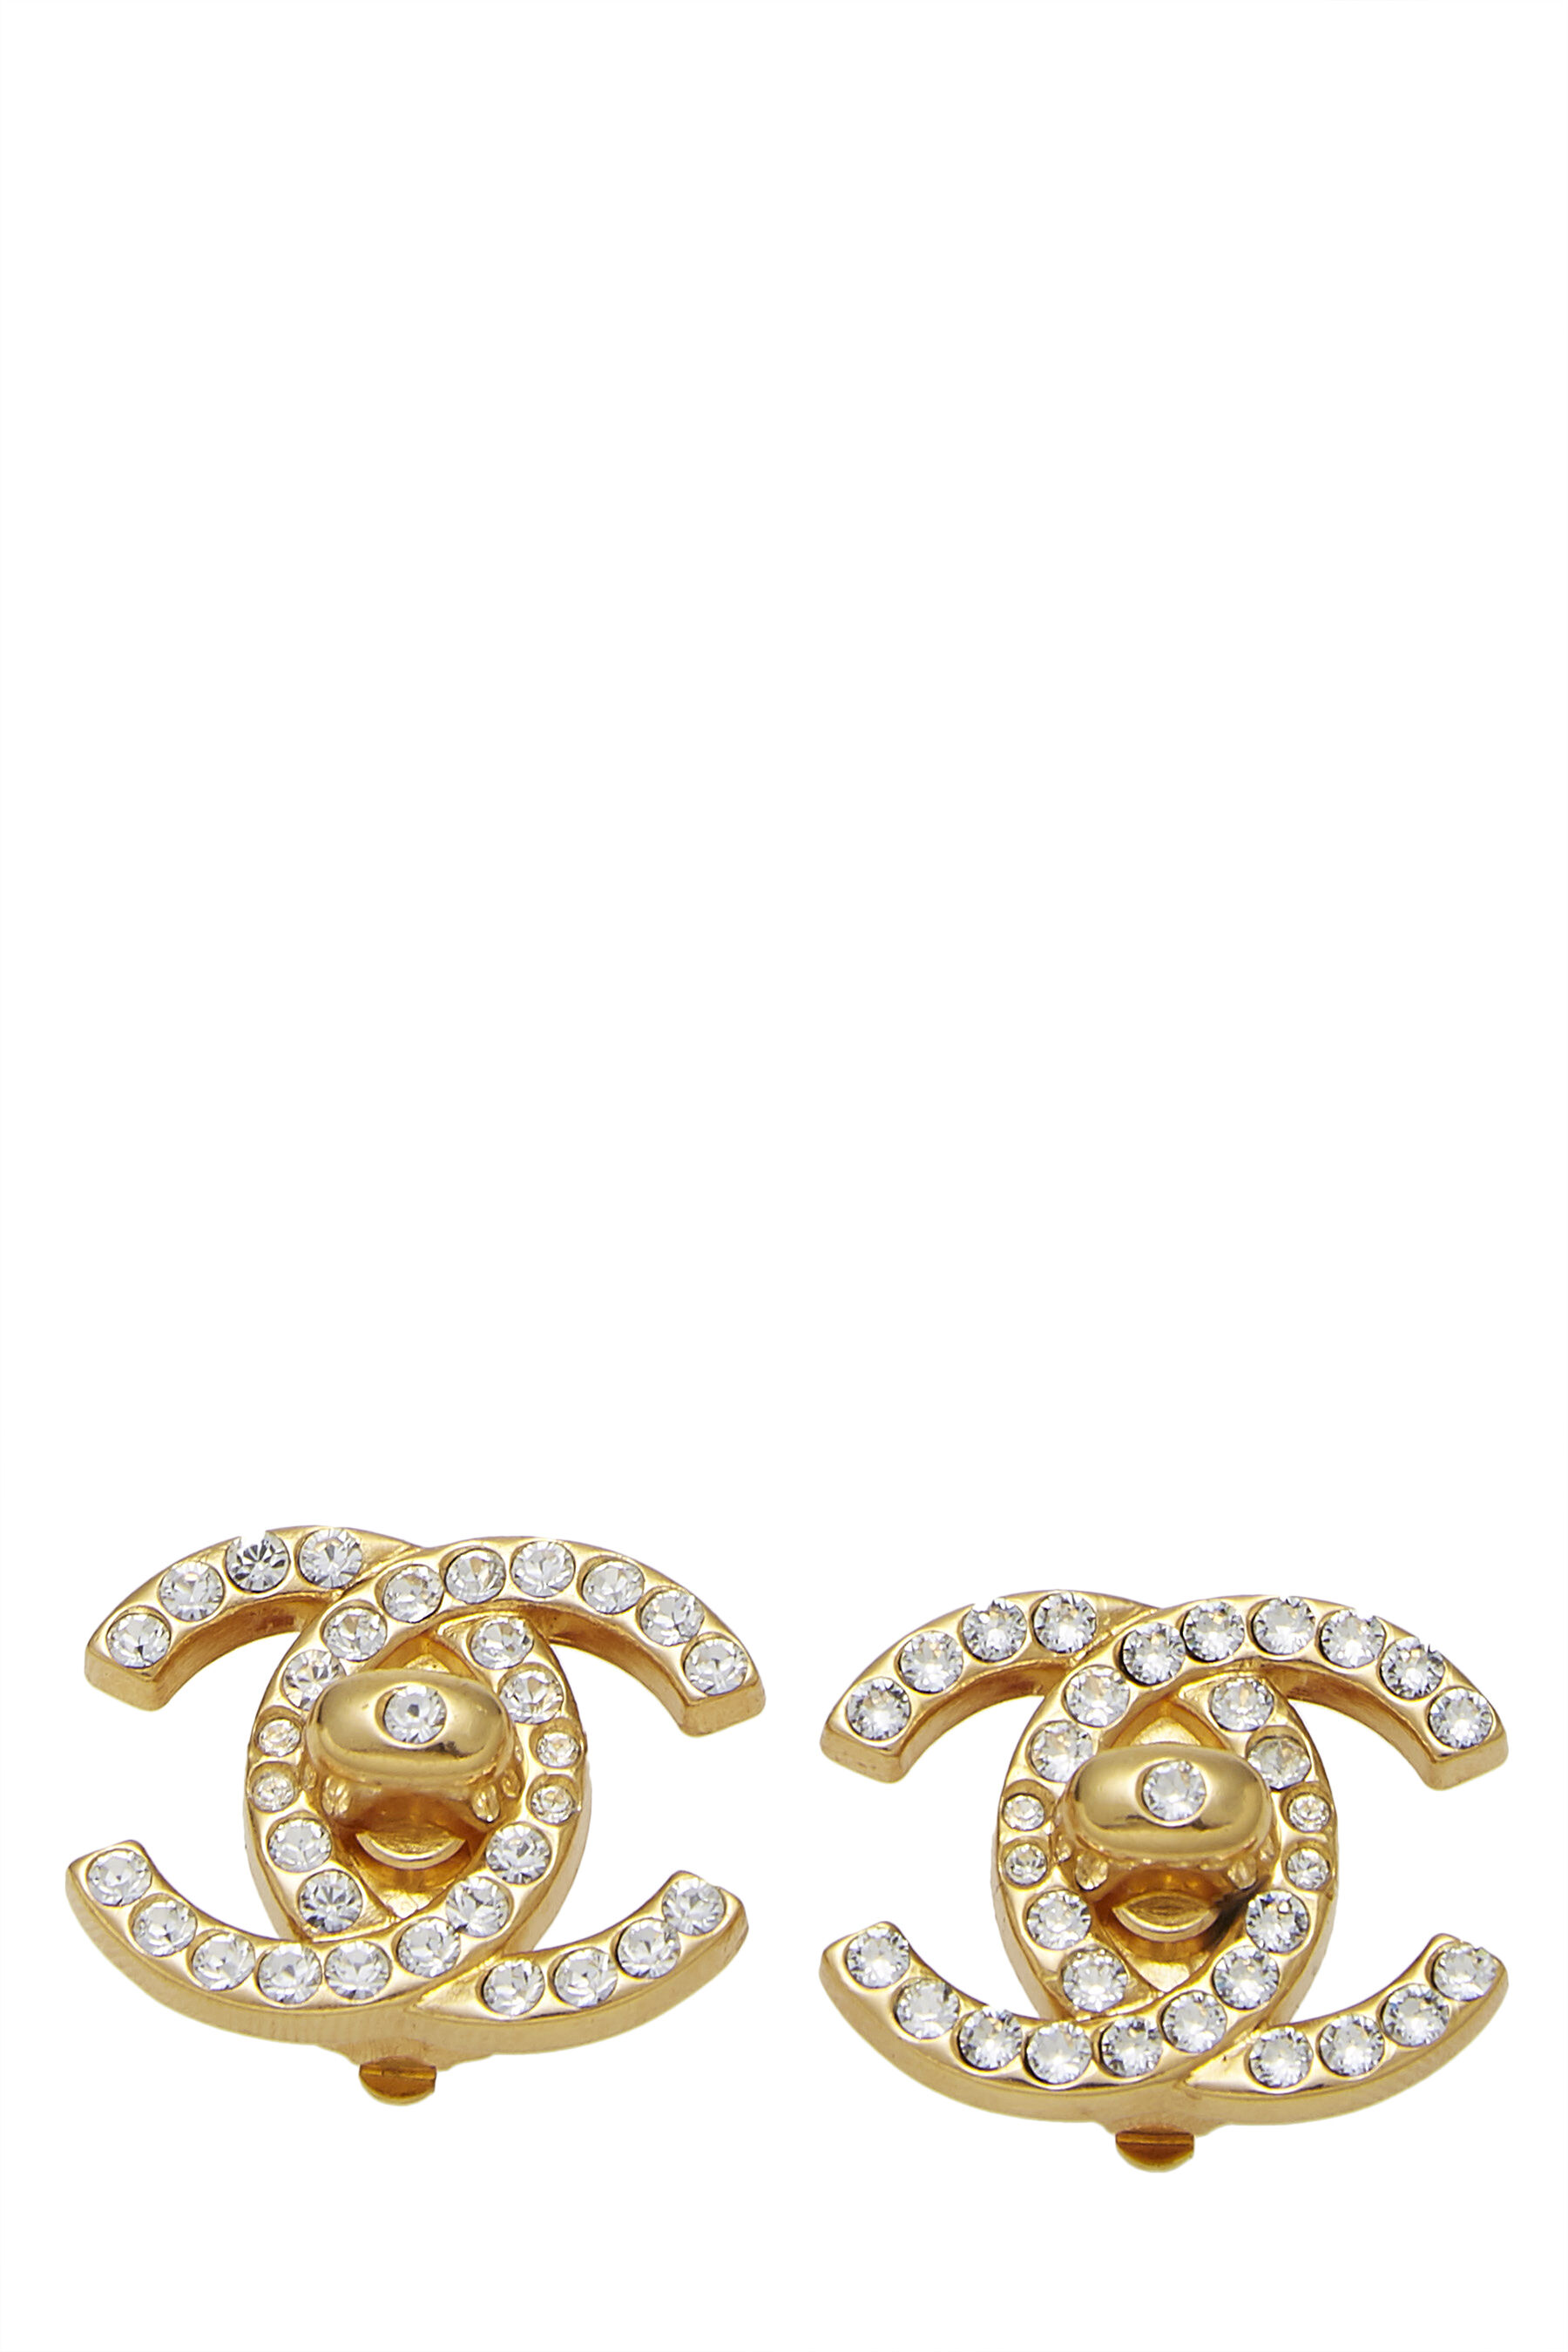 Chanel Gold Crystal 'CC' Turnlock Earrings Large Q6J0LE0RD5013